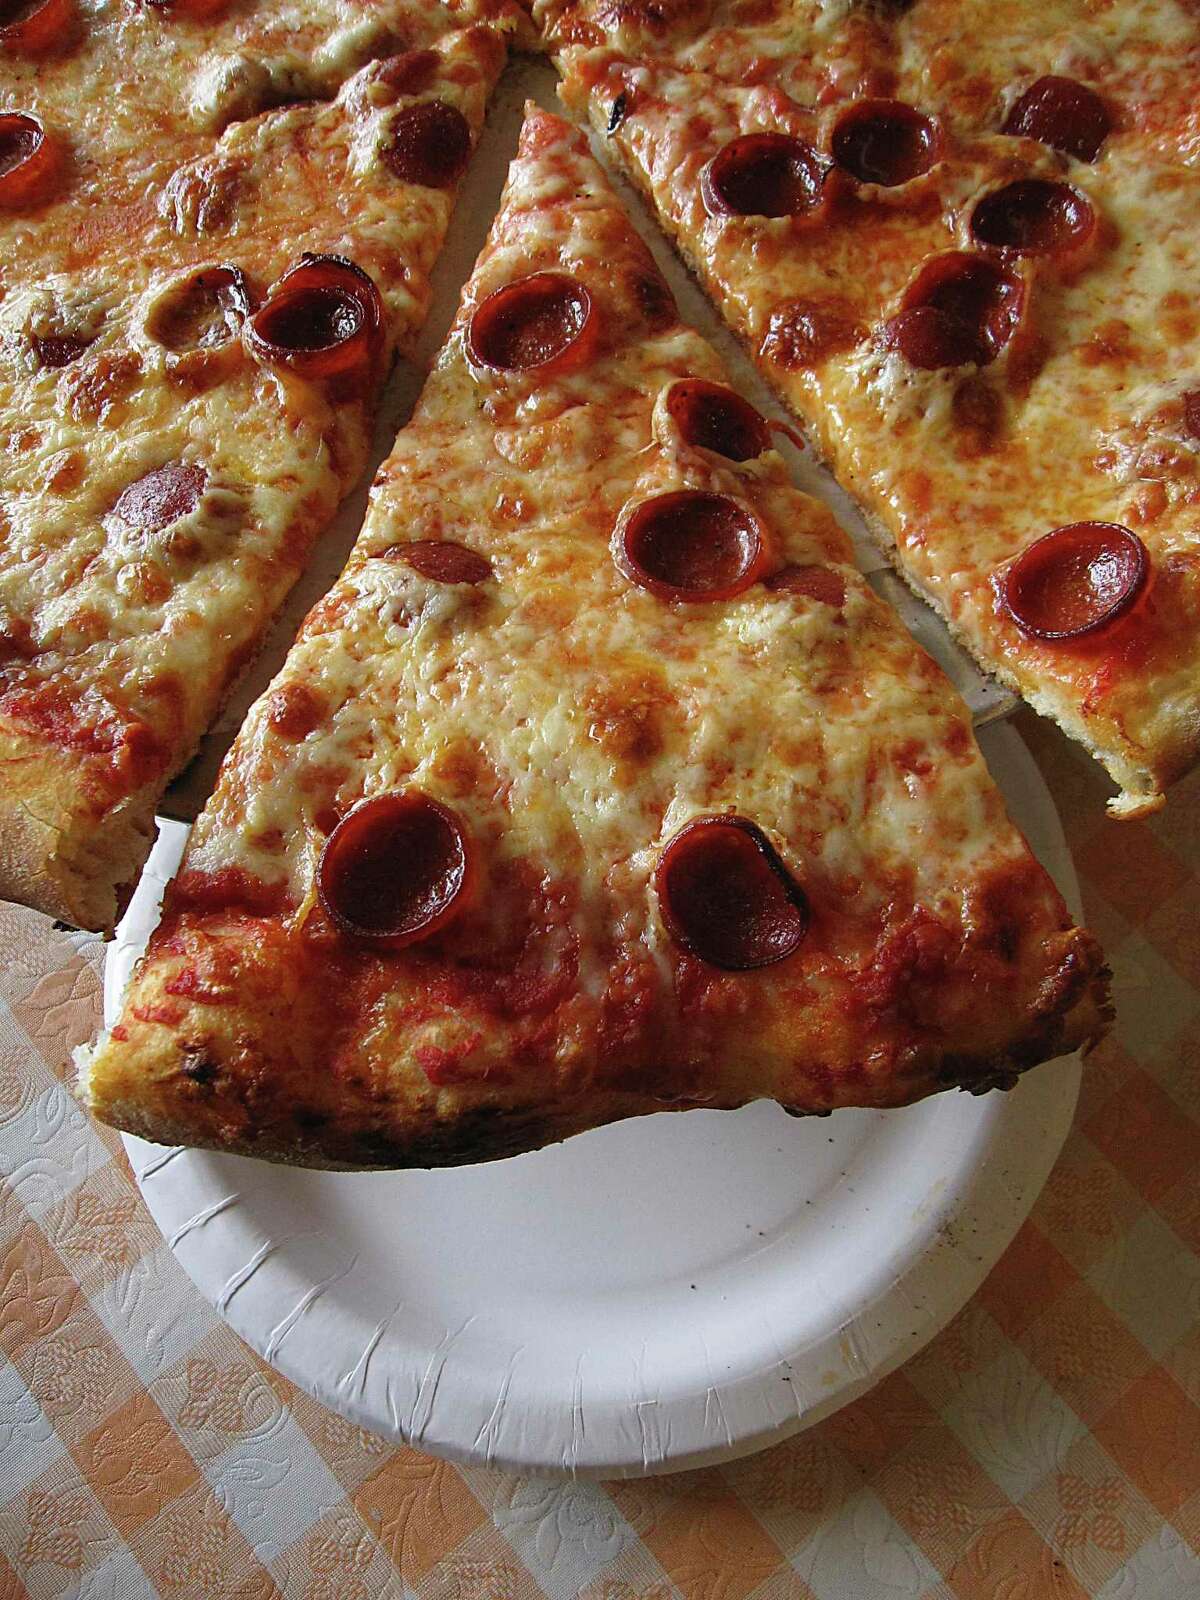 Pizza options include classic pepperoni at Capo's Pizzeria on Broadway.